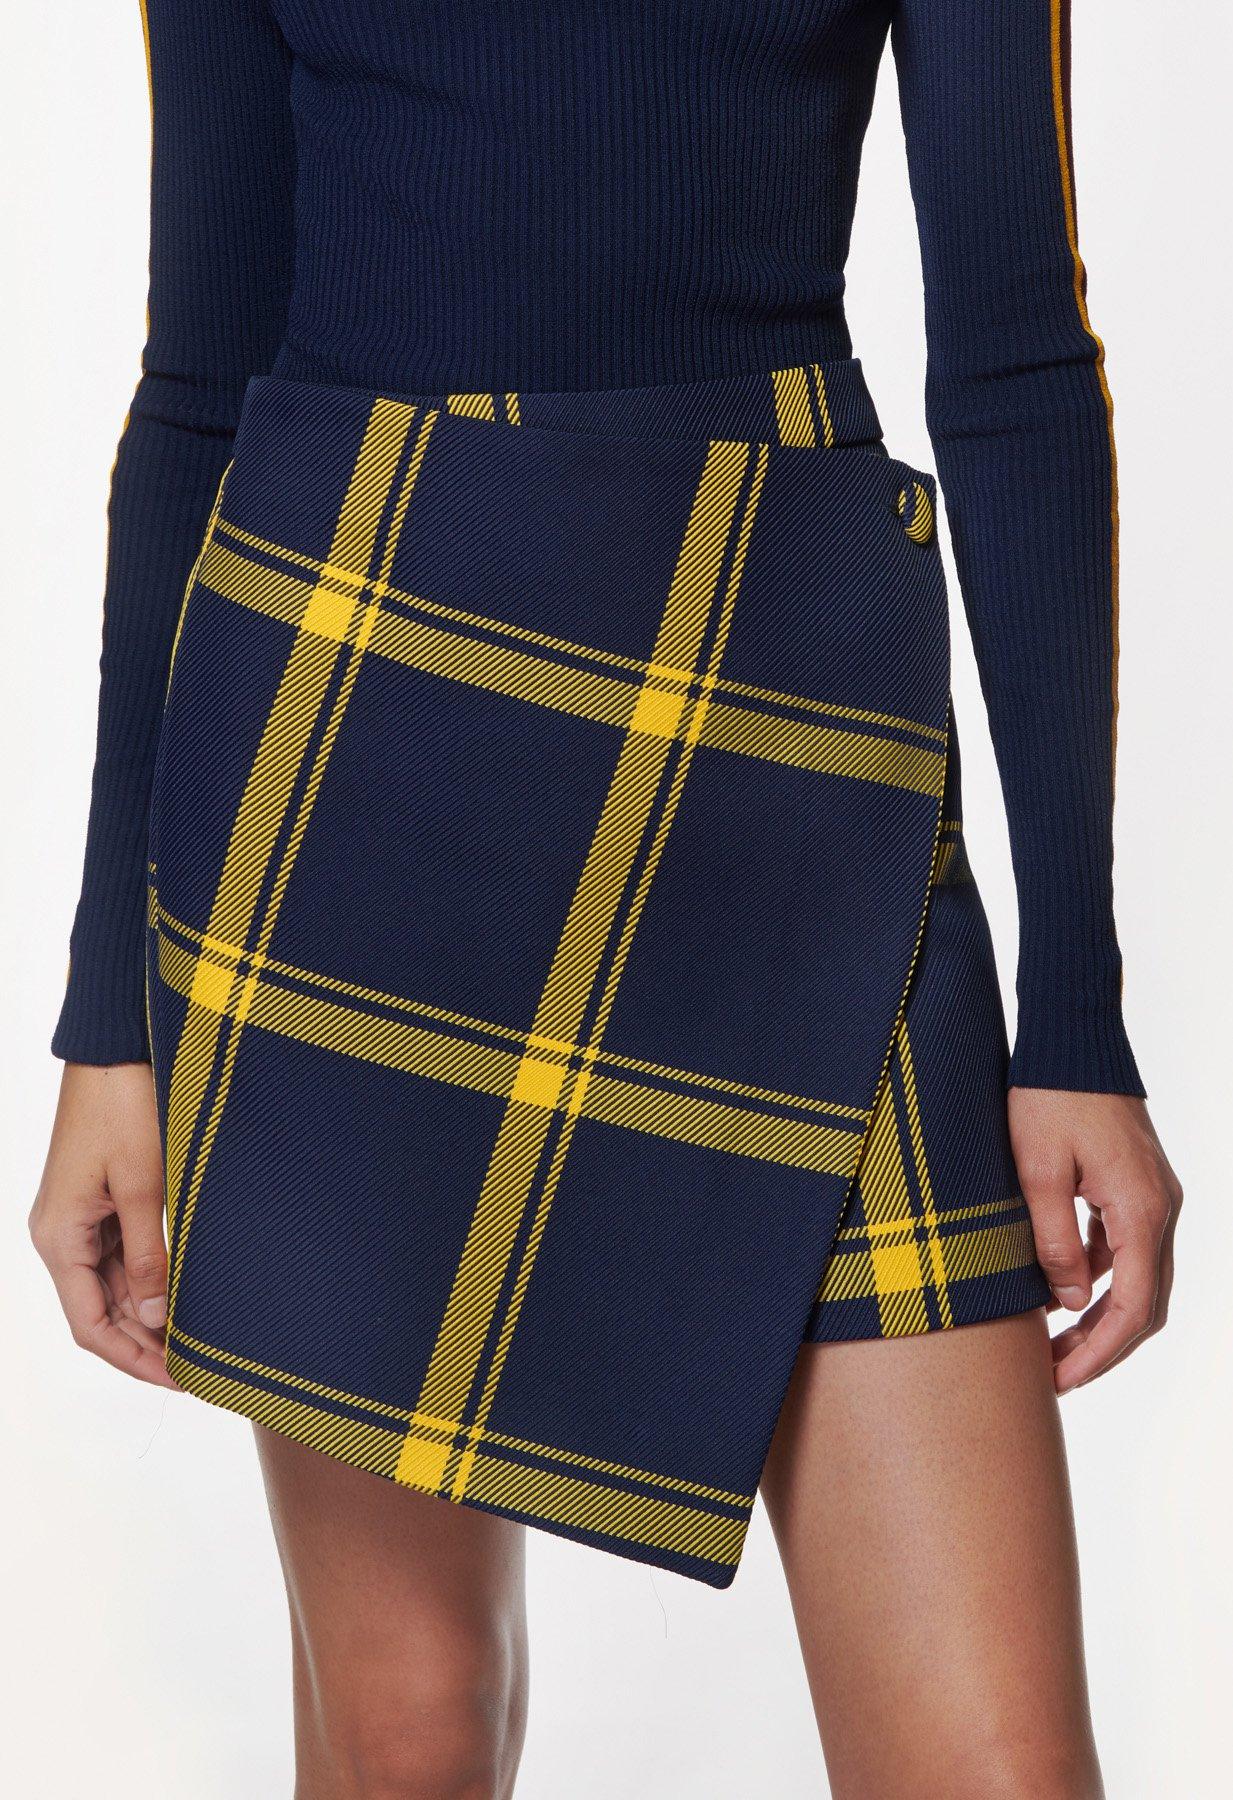 MILLY Synthetic Prepster Check Wrap Skirt in Navy/Gold (Blue) - Lyst